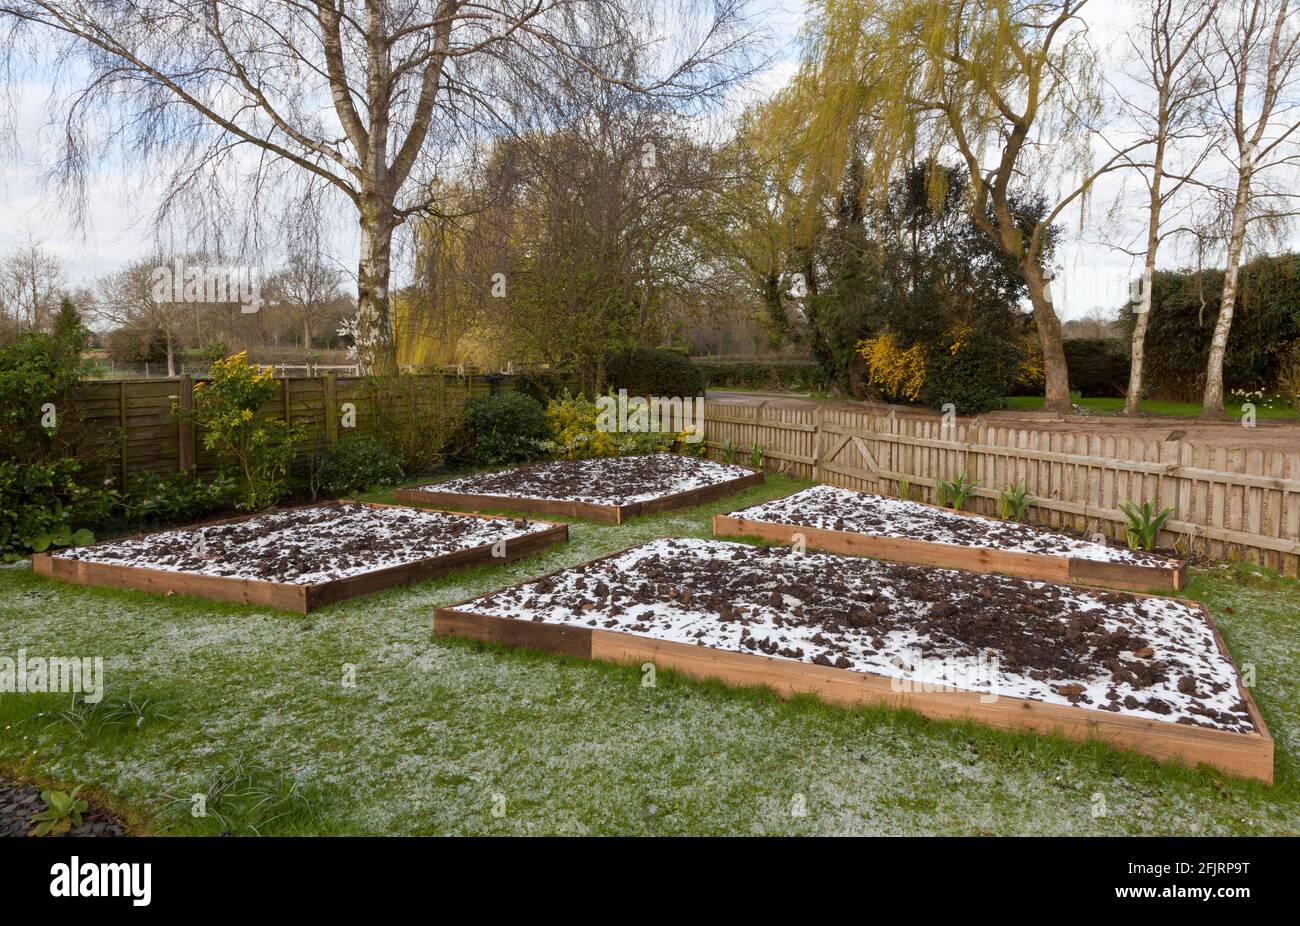 New garden raised beds covered with a sprinkling of snow Stock Photo